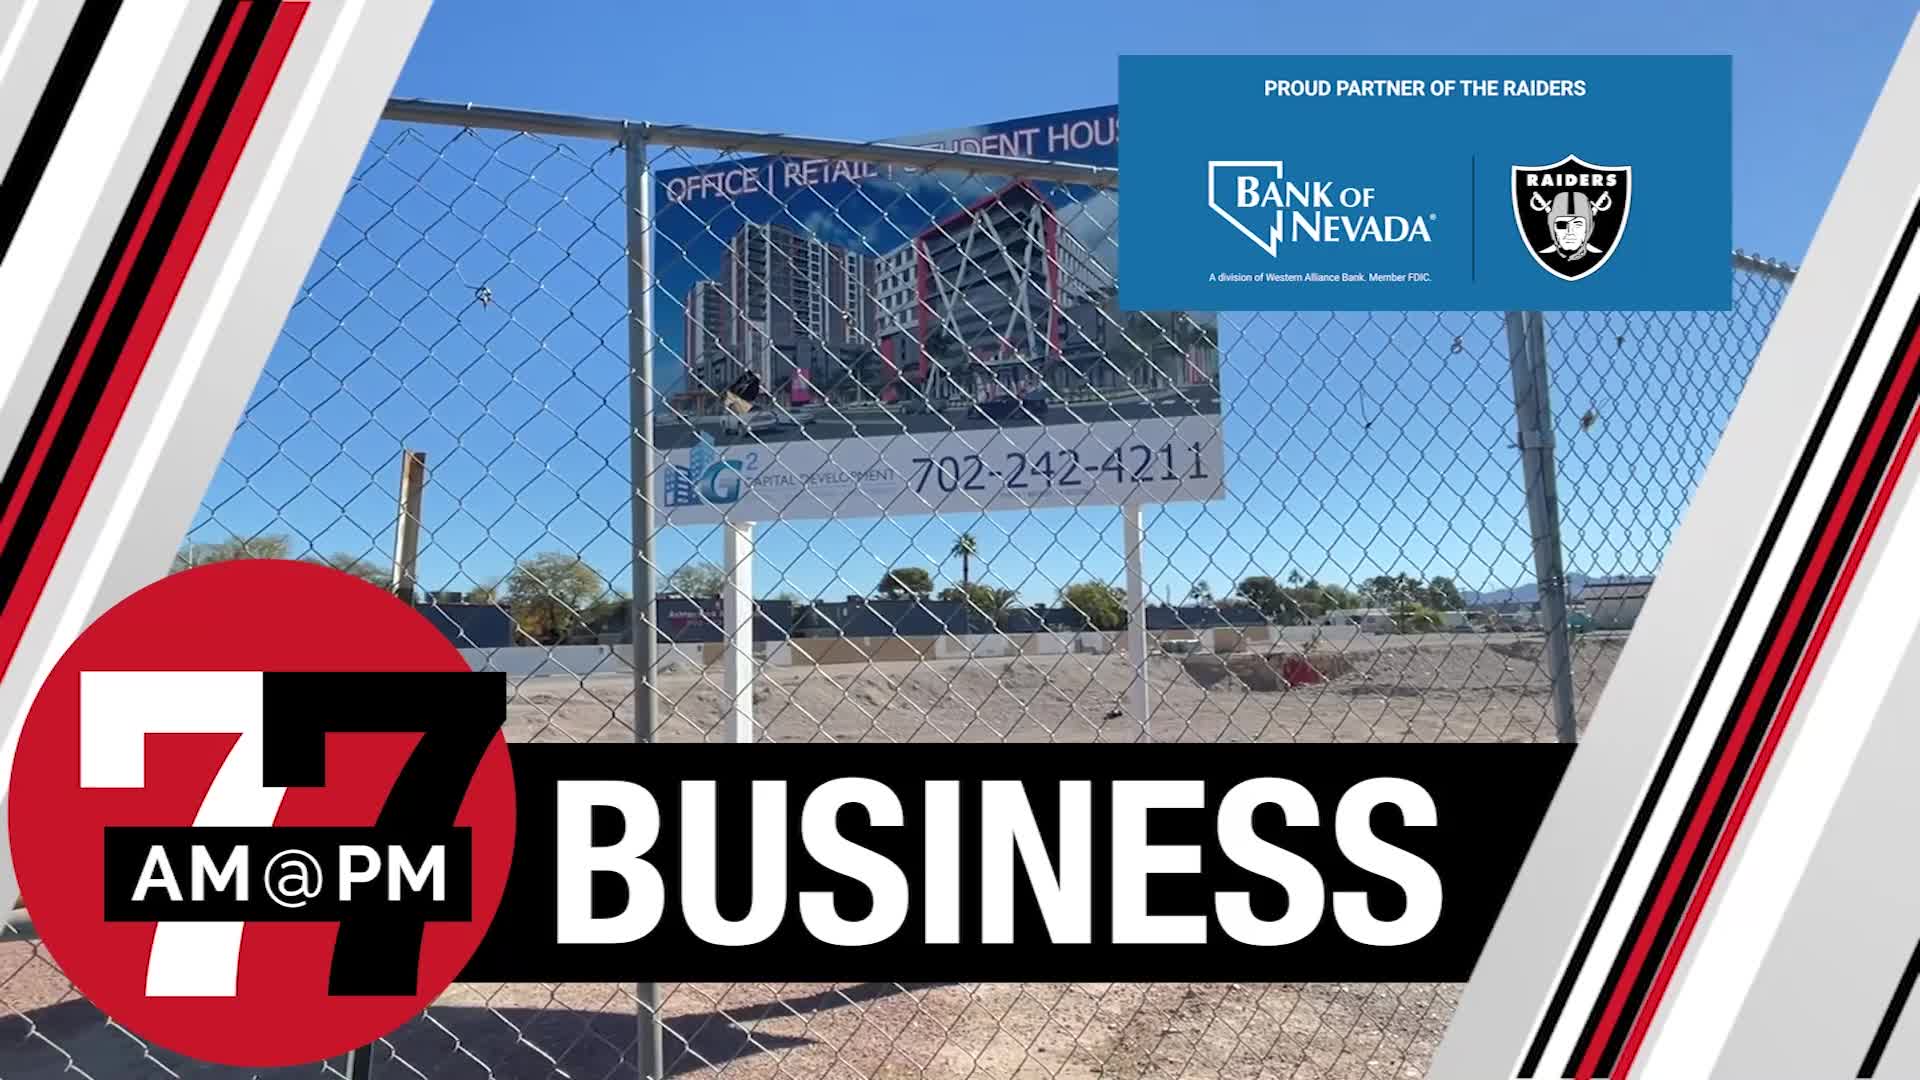 7@7PM Mixed-Use UNLV Project in the Works